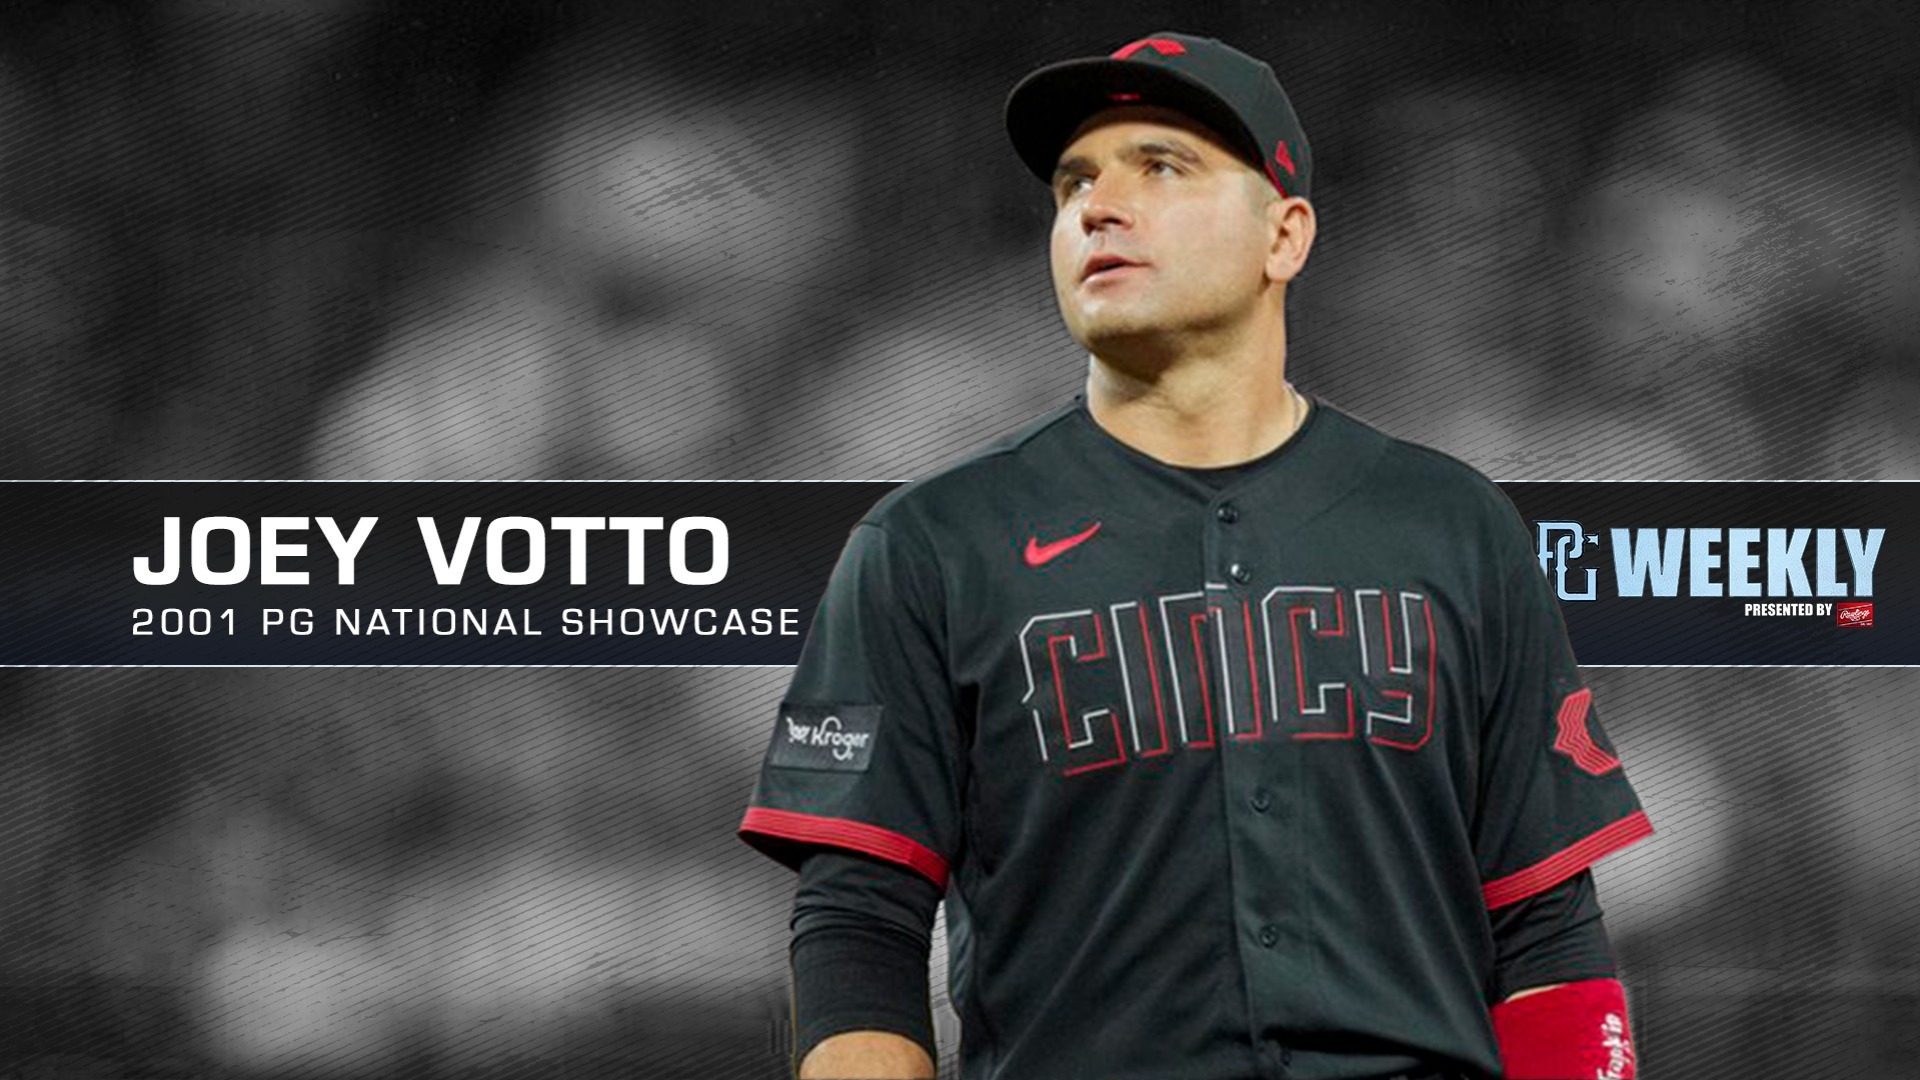 Big Read: Inside the mind of Joey Votto, baseball's solitary superstar